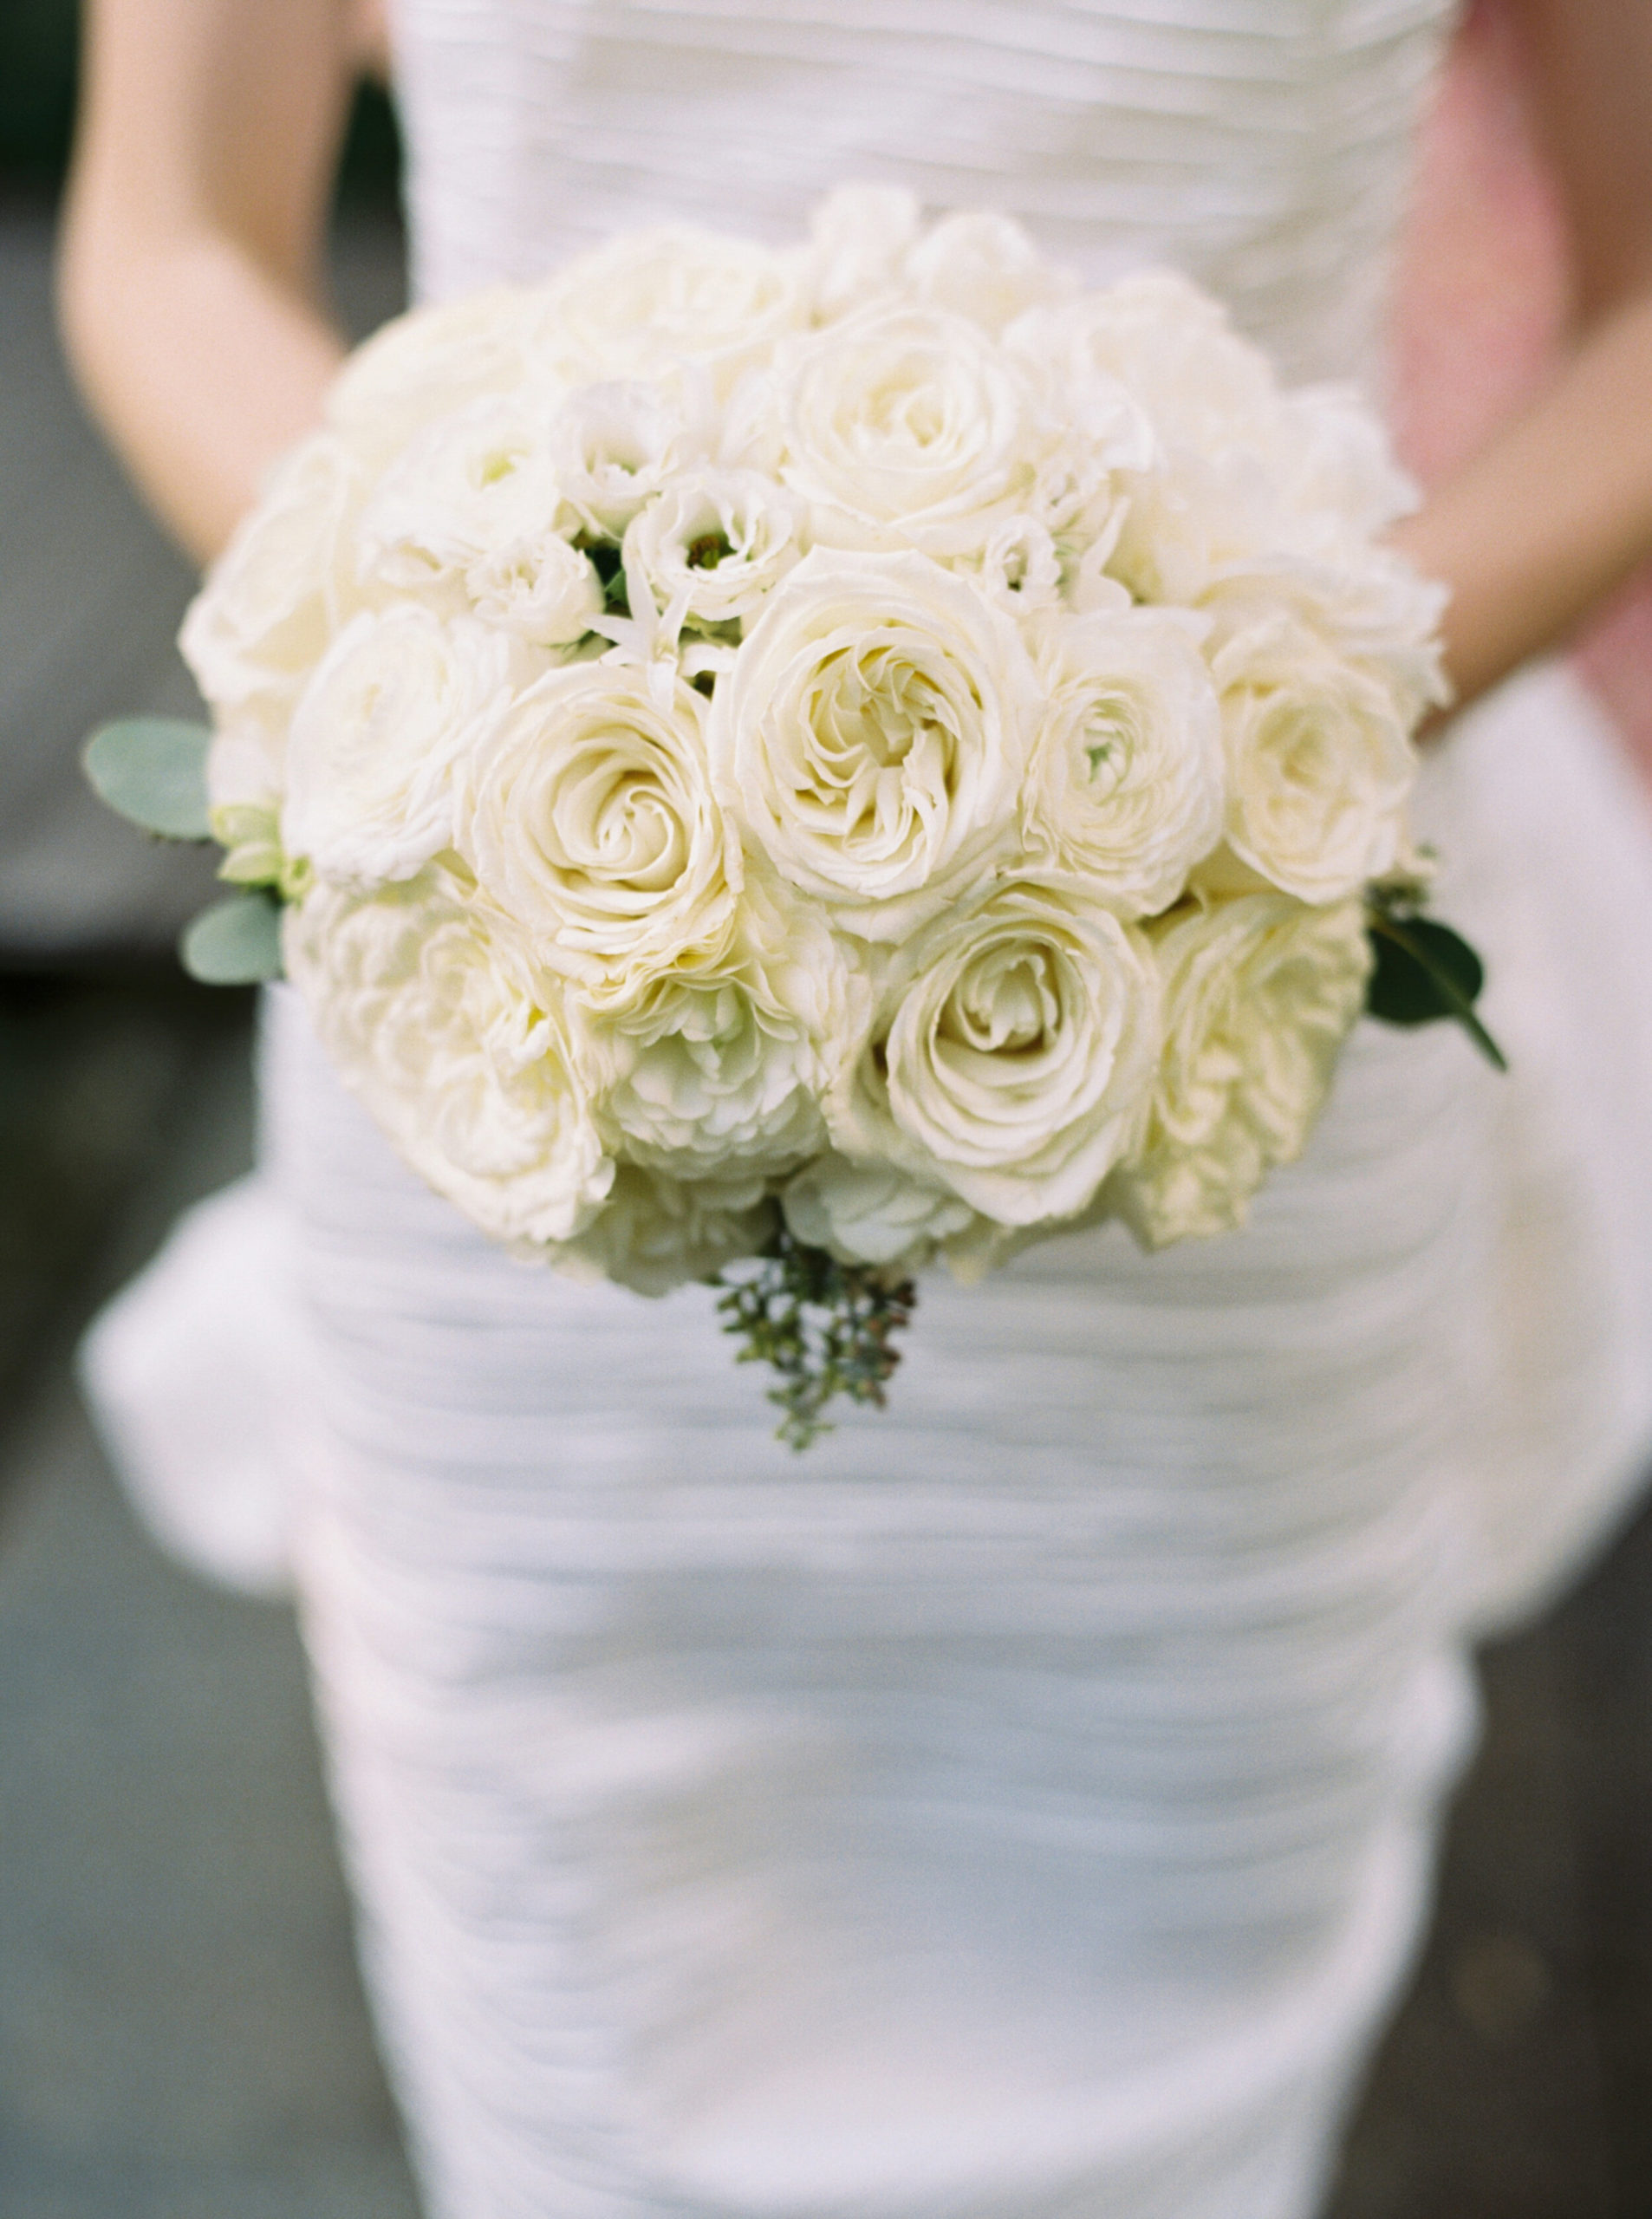 Bouquet Inspiration - Colors can be modified